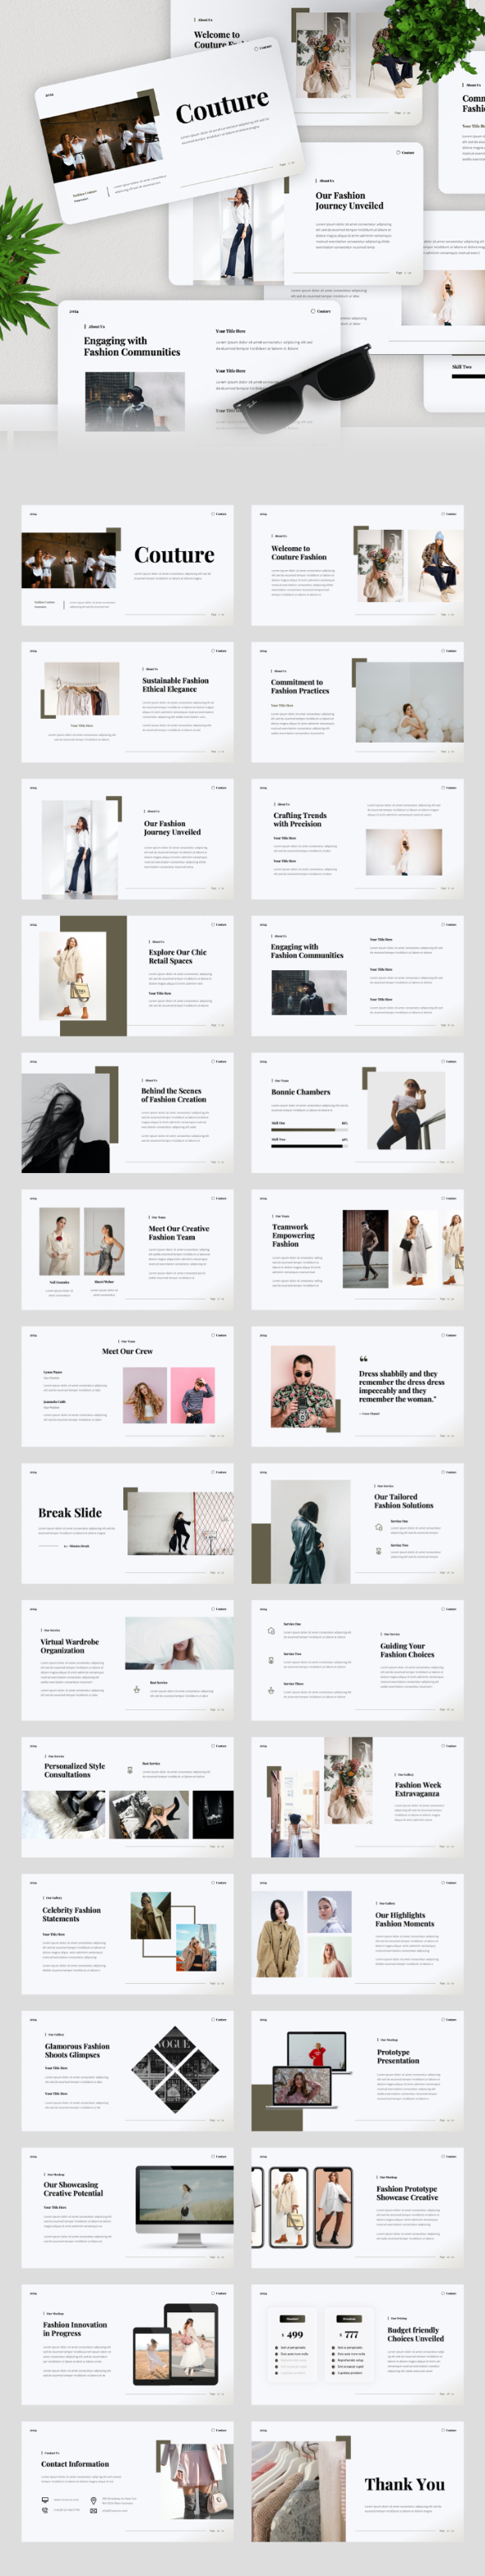 [DOWNLOAD]Couture - Fashion Keynote Template